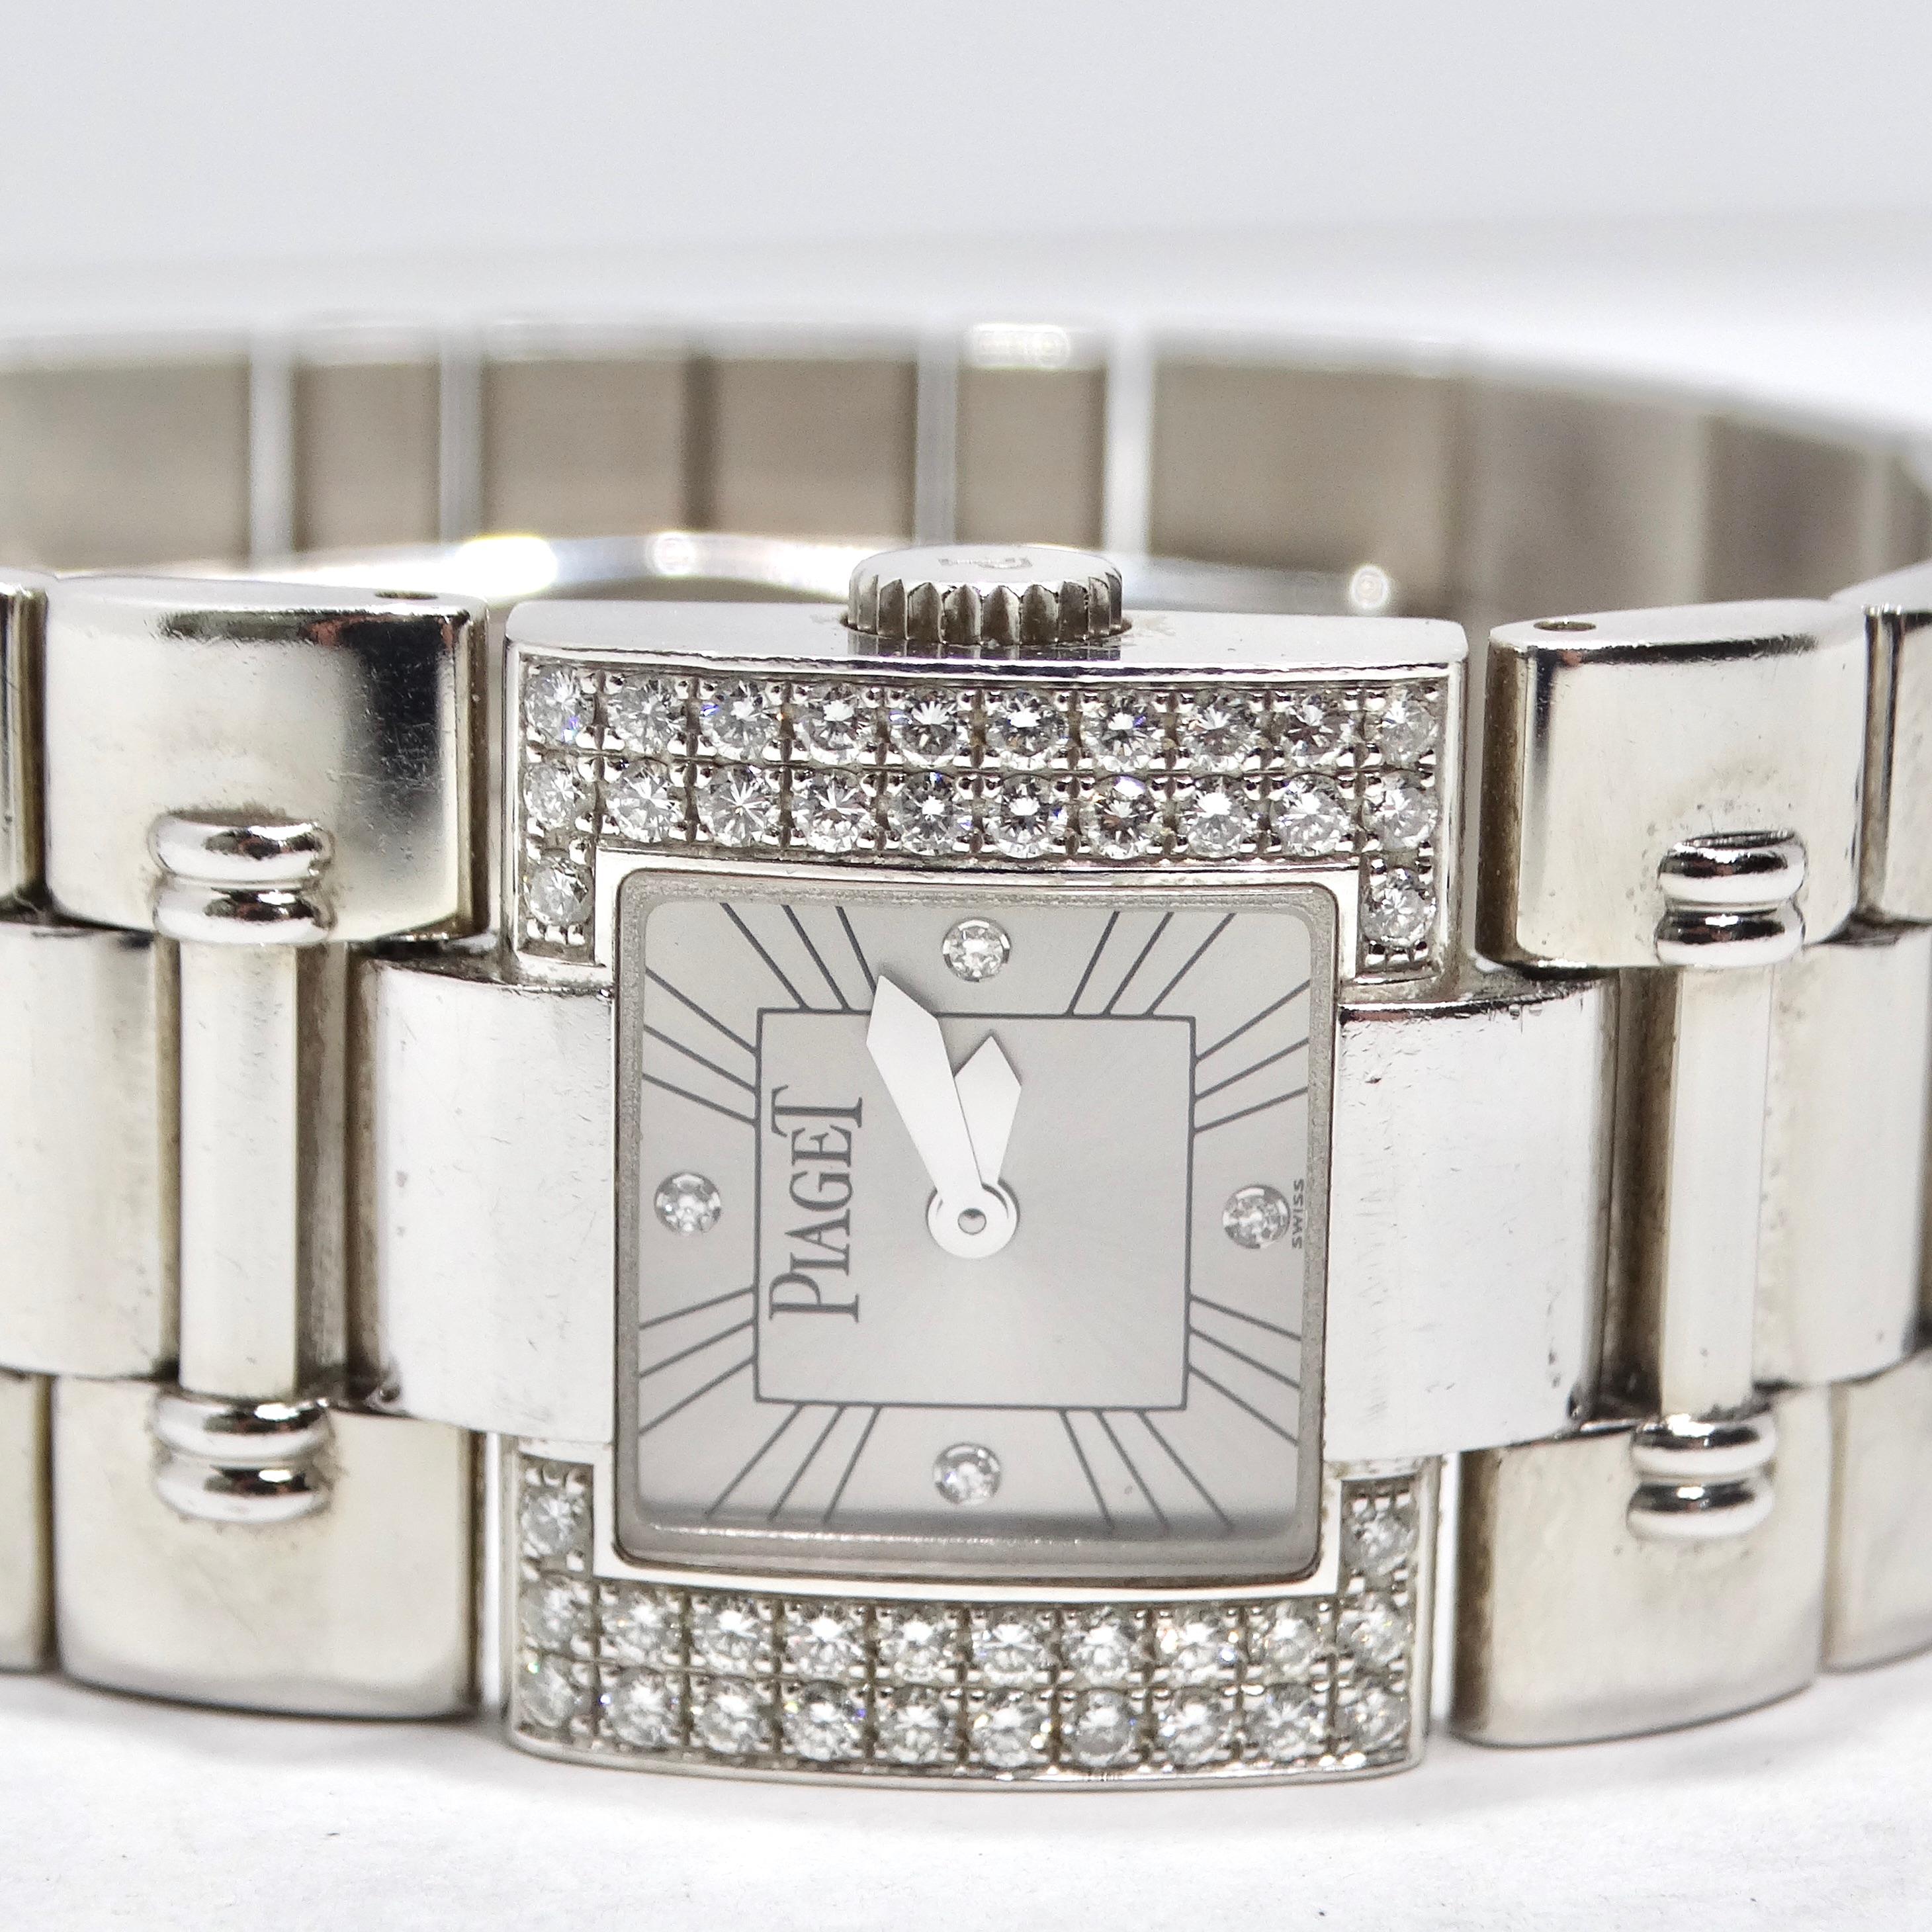 Do not miss out on the Piaget Square Dancer Diamond Bezel White Gold Watch, a true masterpiece of watchmaking and a symbol of luxury. Crafted from white gold, this watch embodies timeless elegance and sophistication. Its classic design is a